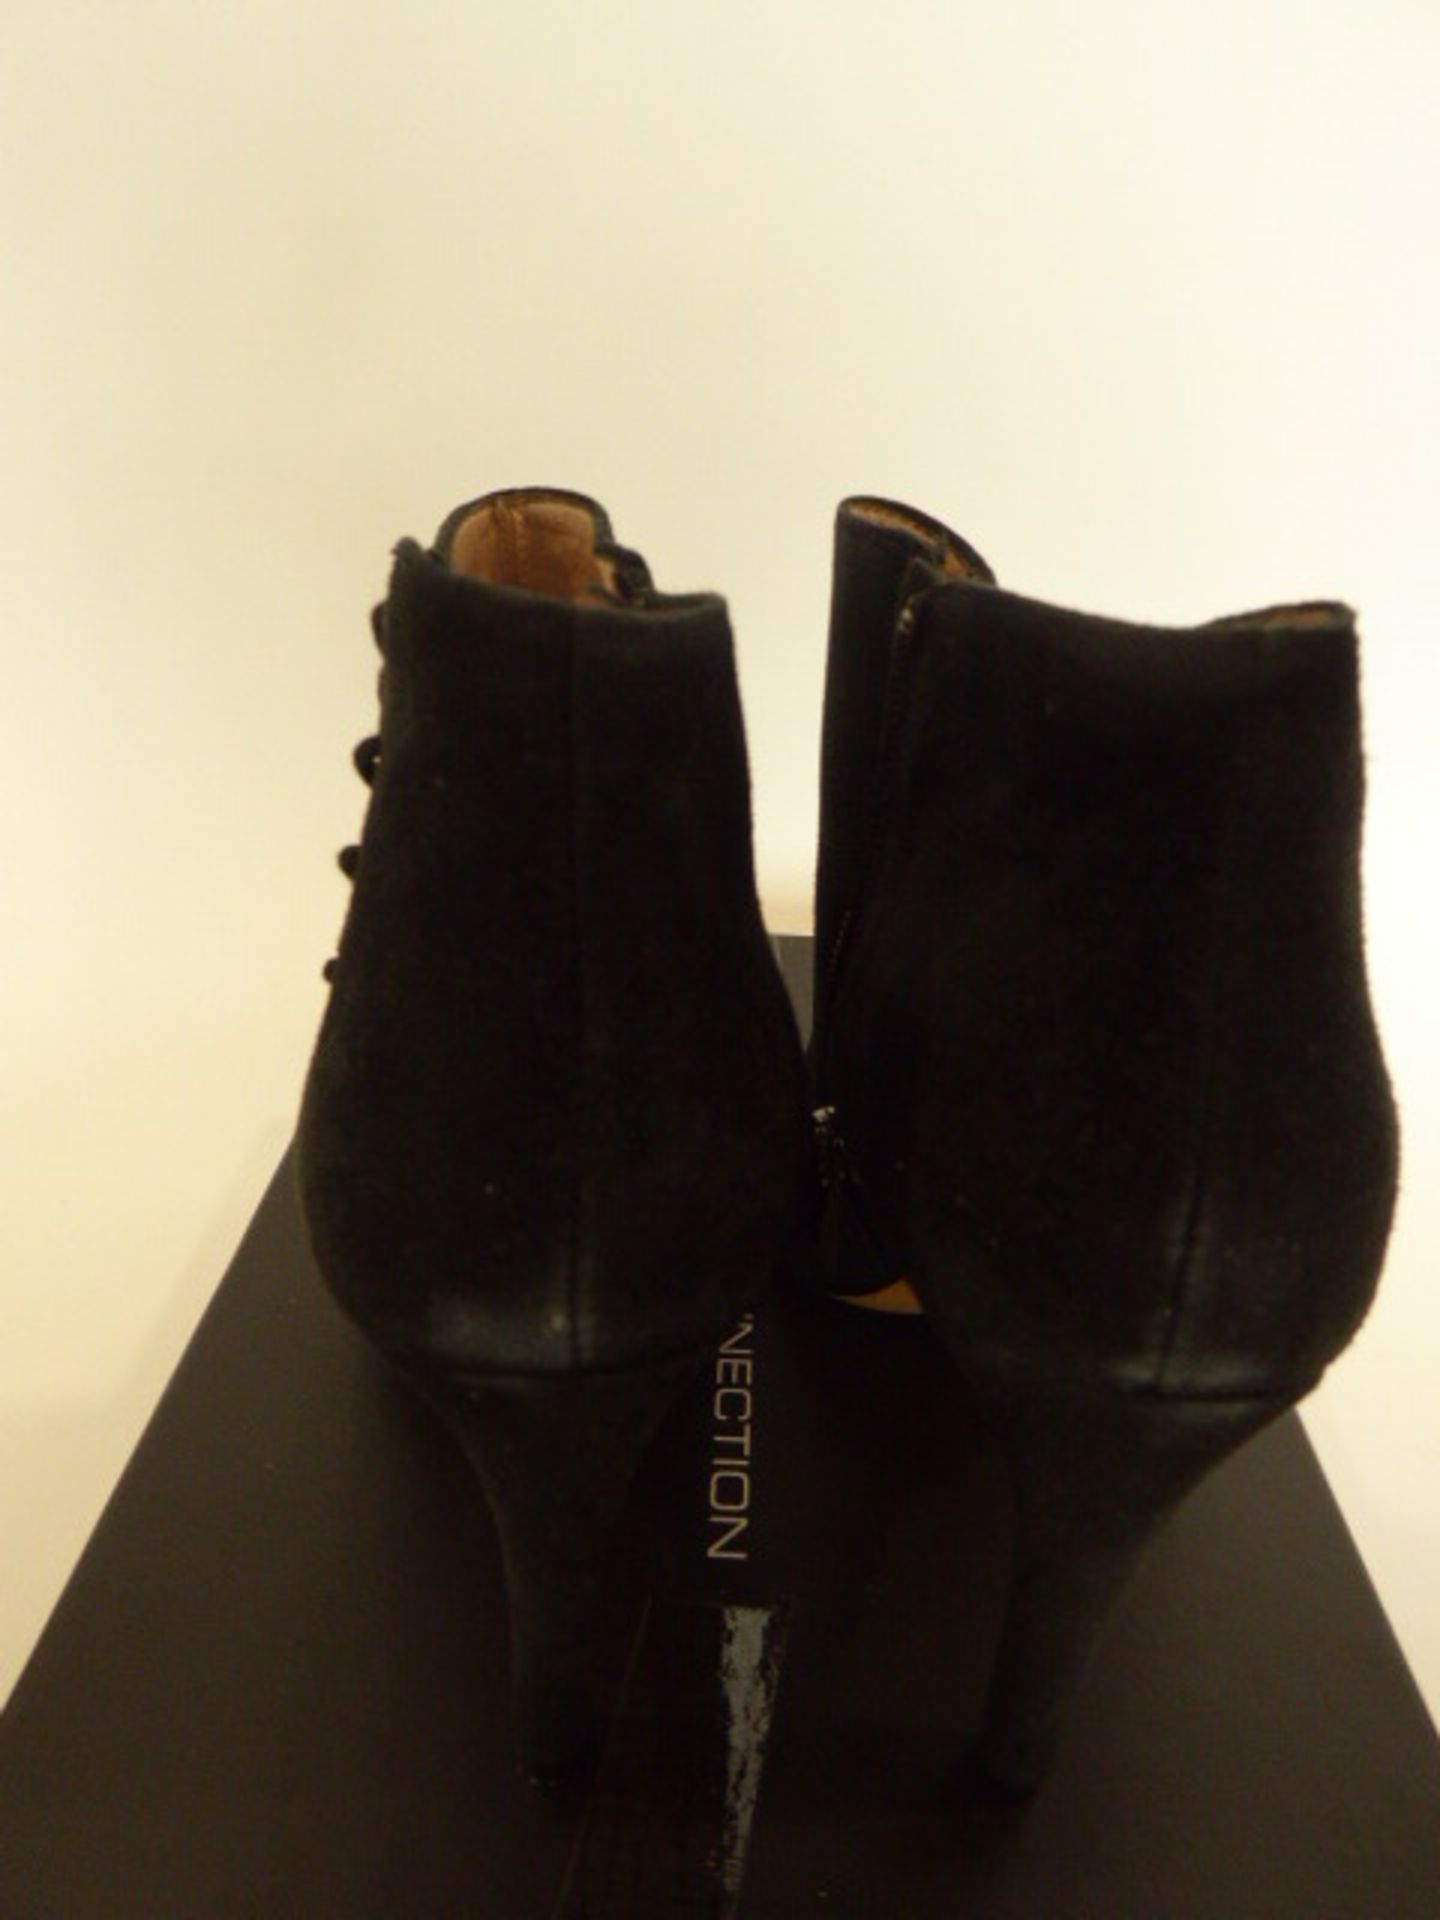 French Connection Quincy suede heels size EU 39 (used) - Image 3 of 5